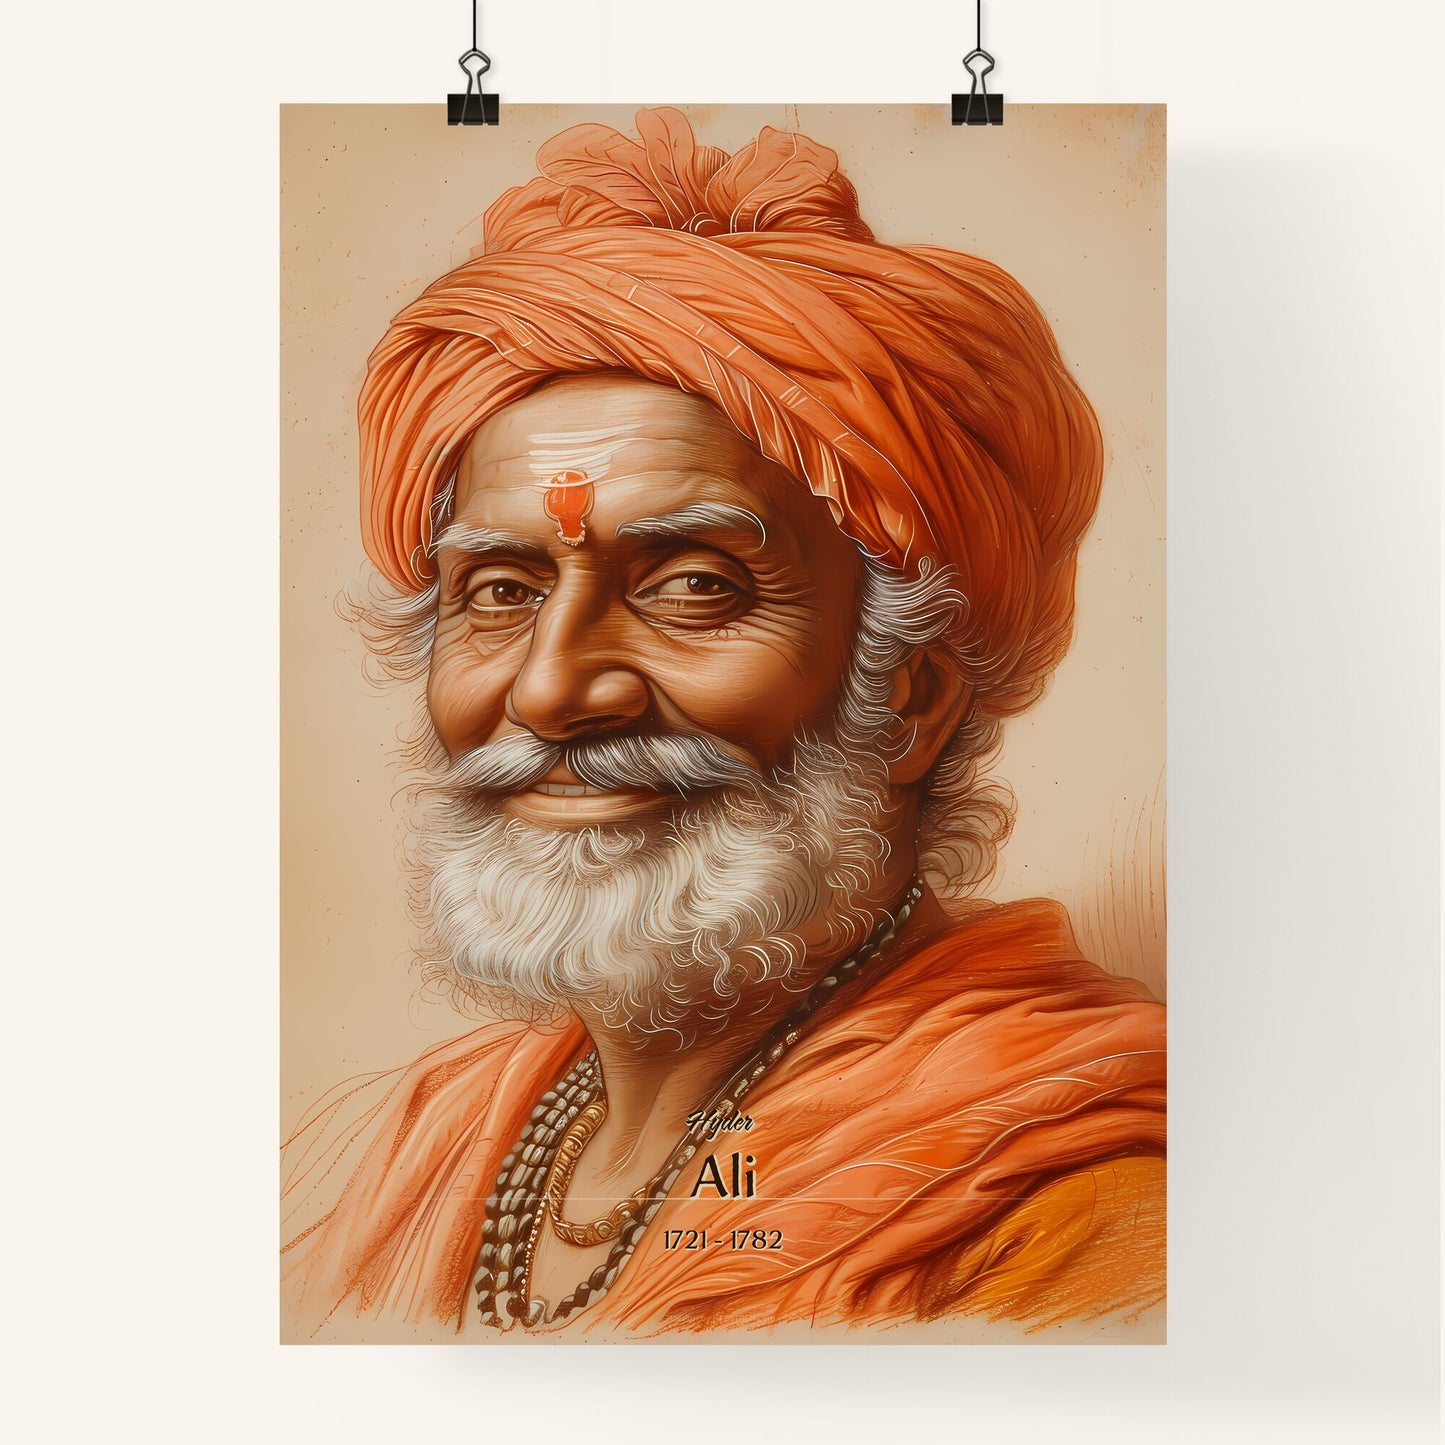 Hyder, Ali, 1721 - 1782, A Poster of a man with a beard wearing an orange turban Default Title